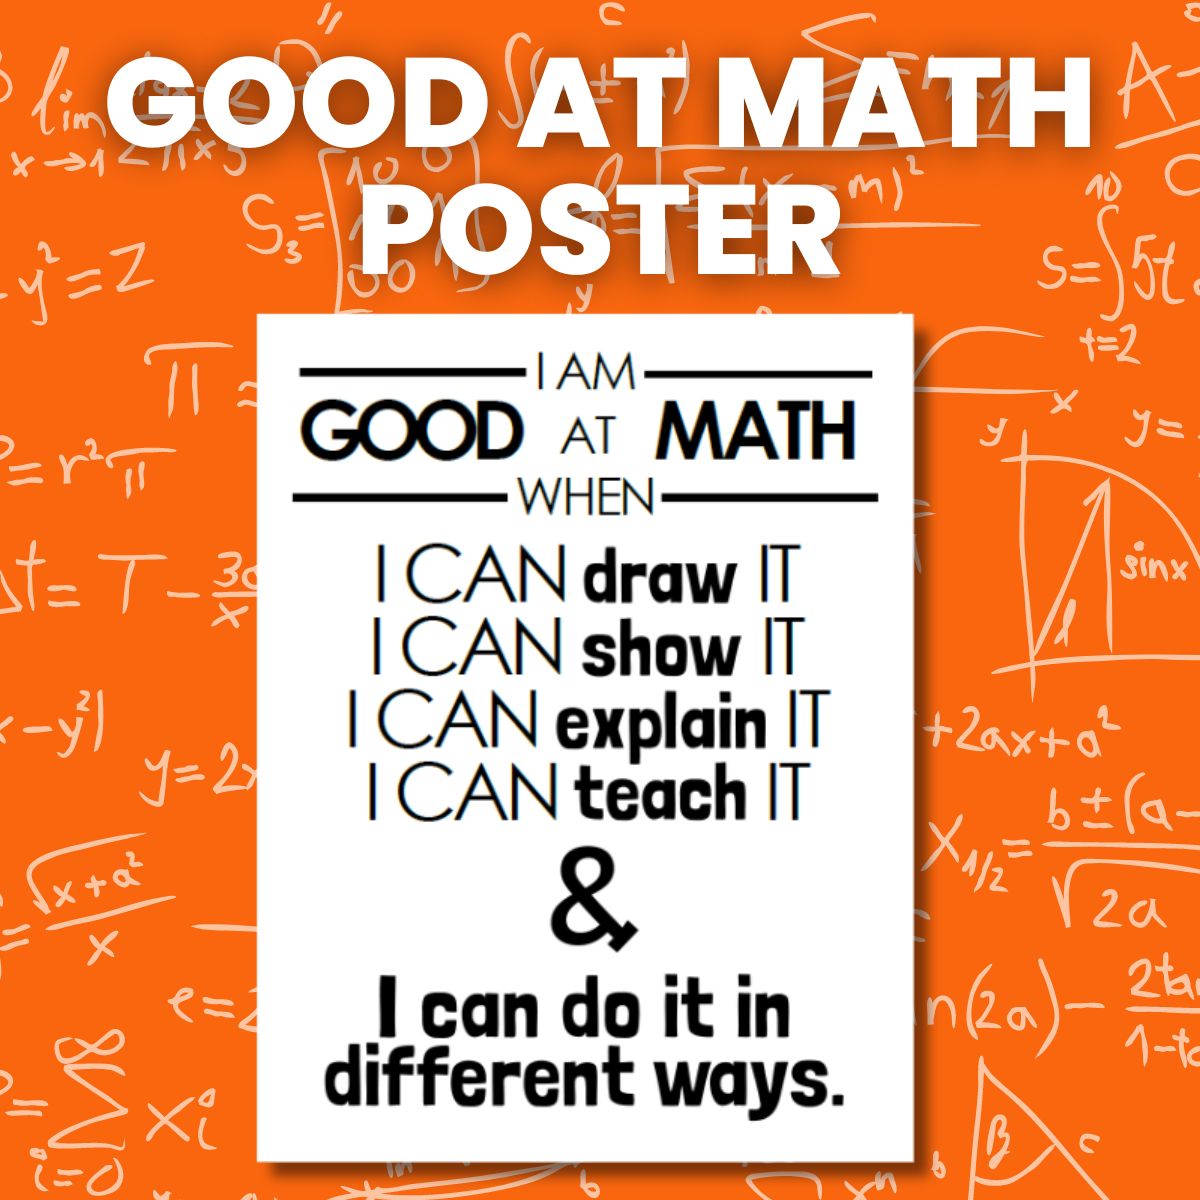 good at math poster with text "I am good at math when I can draw it, I can show it, I can explain it, I can teach it, and I can do it in different ways."